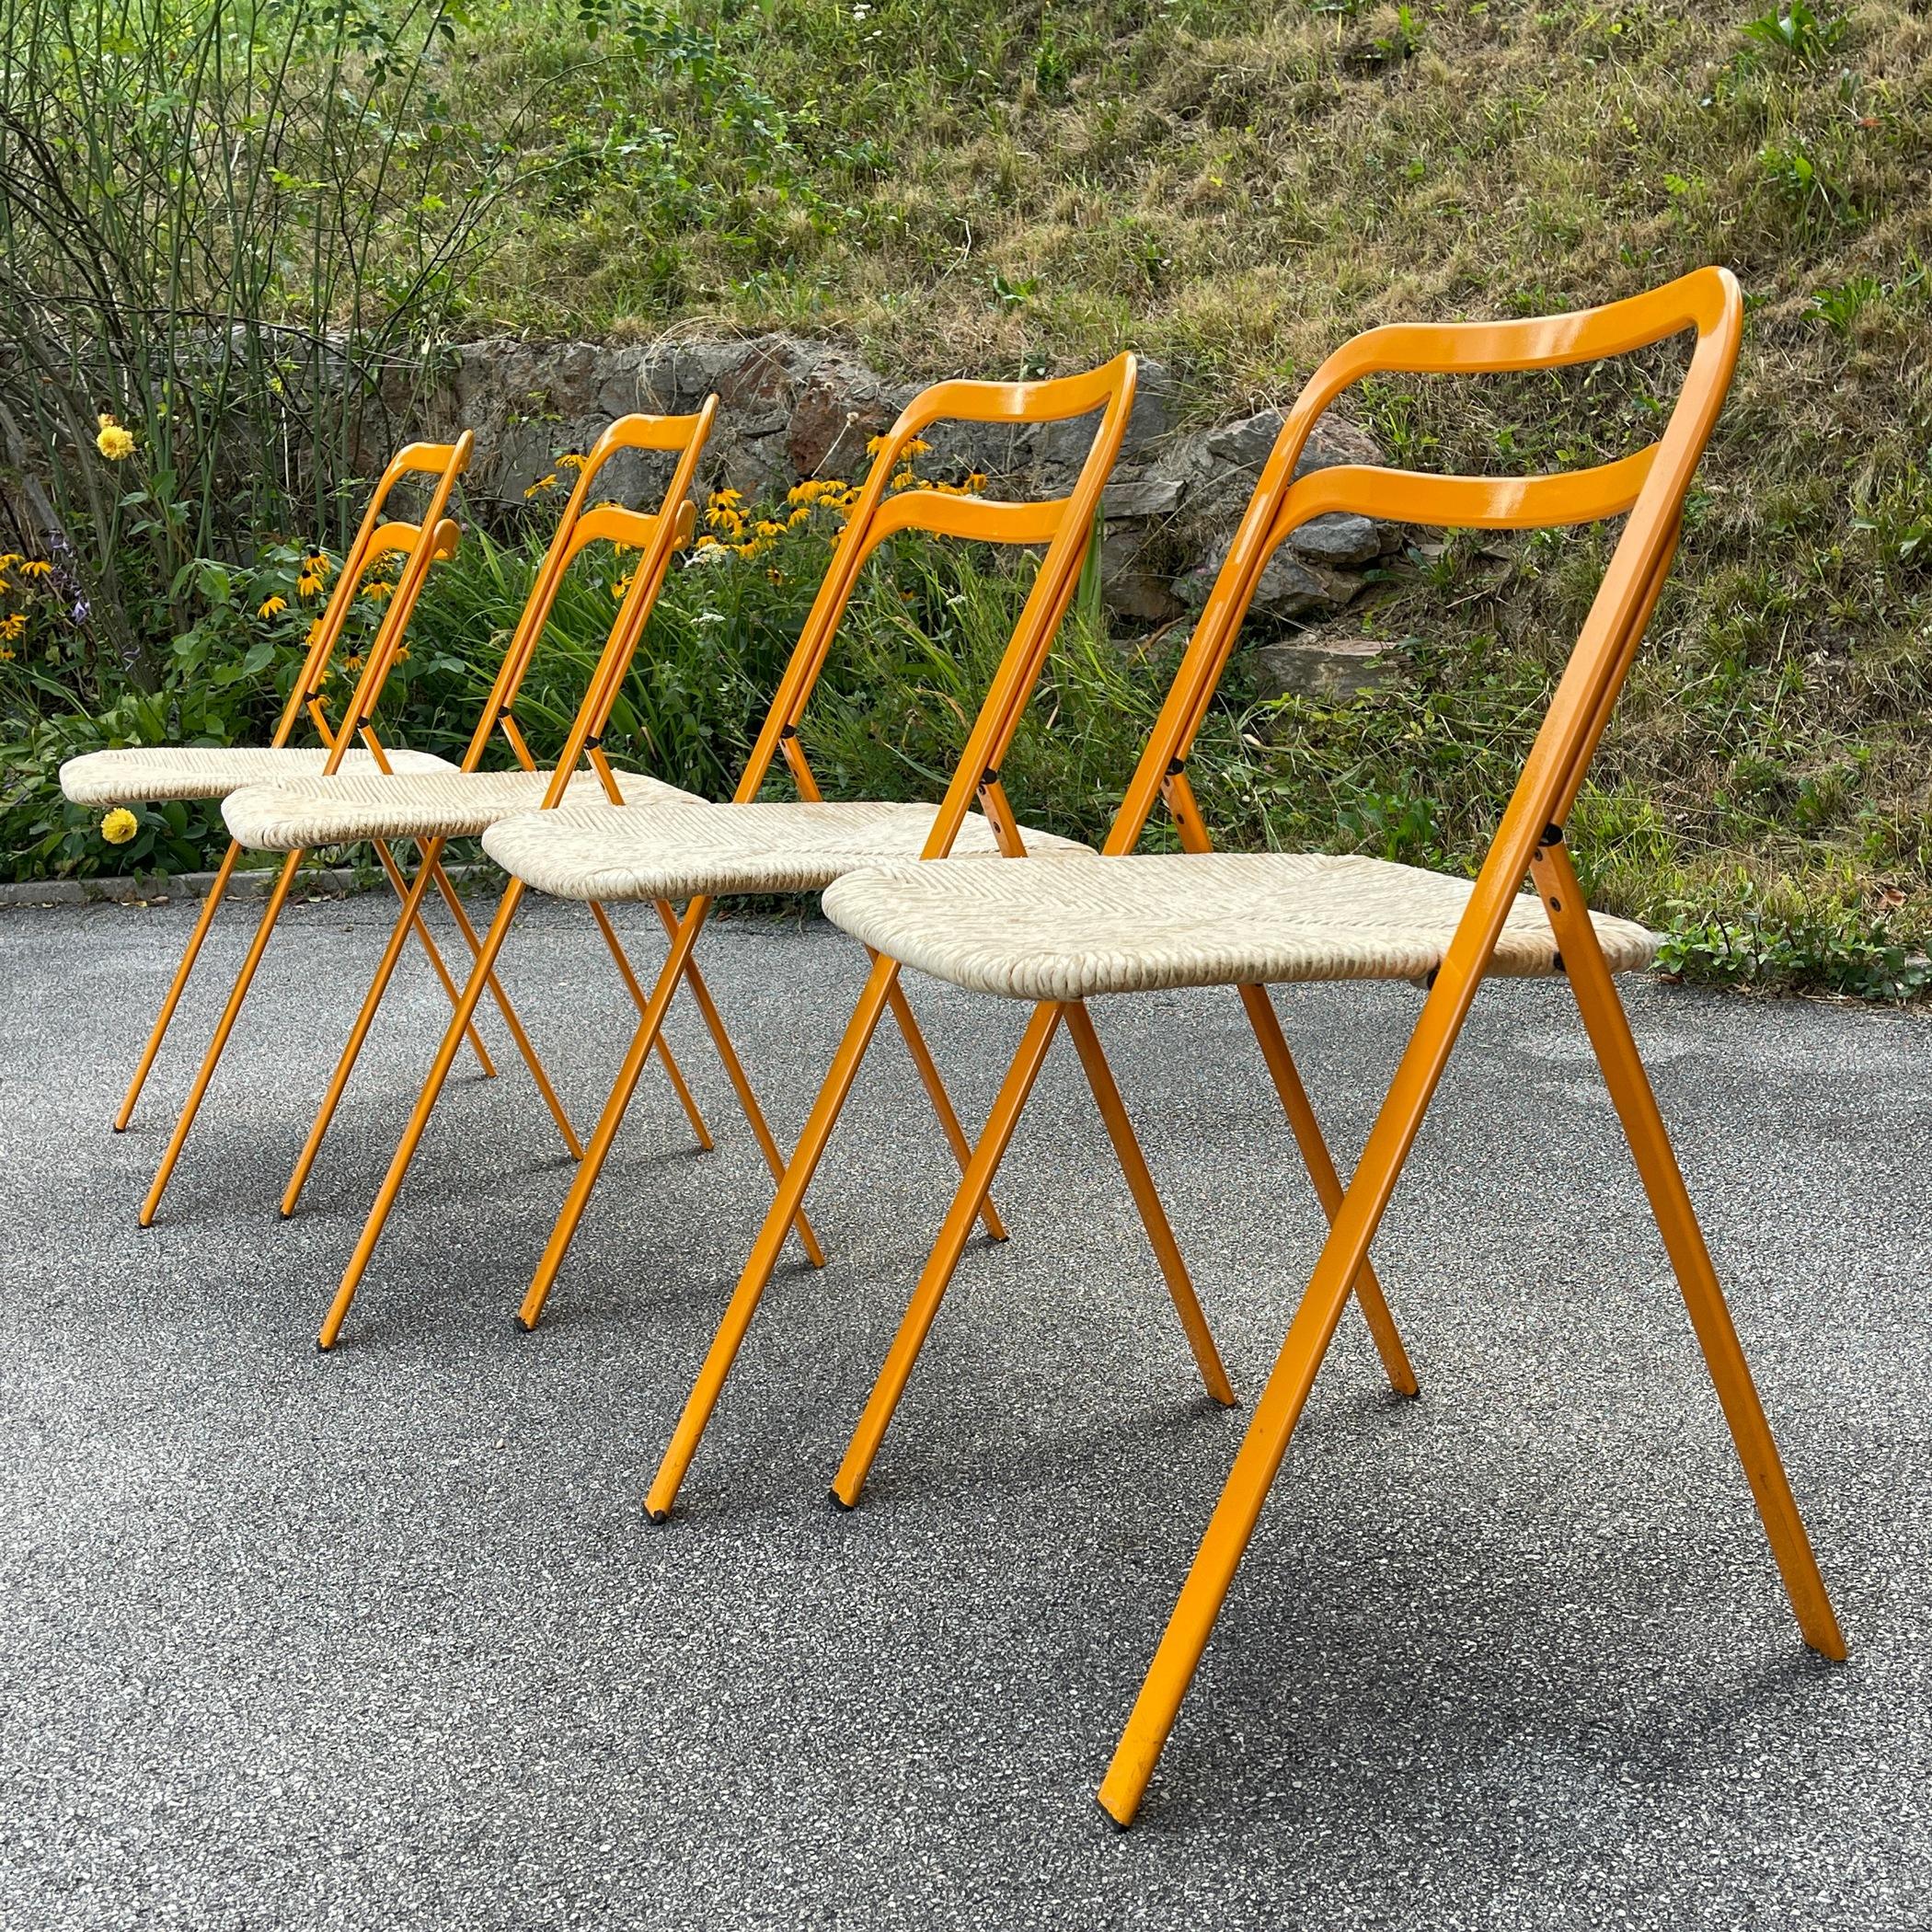 The amazing pair of mid-century folding chairs in orange metal and wicker seat. This fantastic set was designed by Giorgio Cattelan and manufactured by Cidue in Italy in the 1970s. These chairs are a perfect example of mid-century design, very